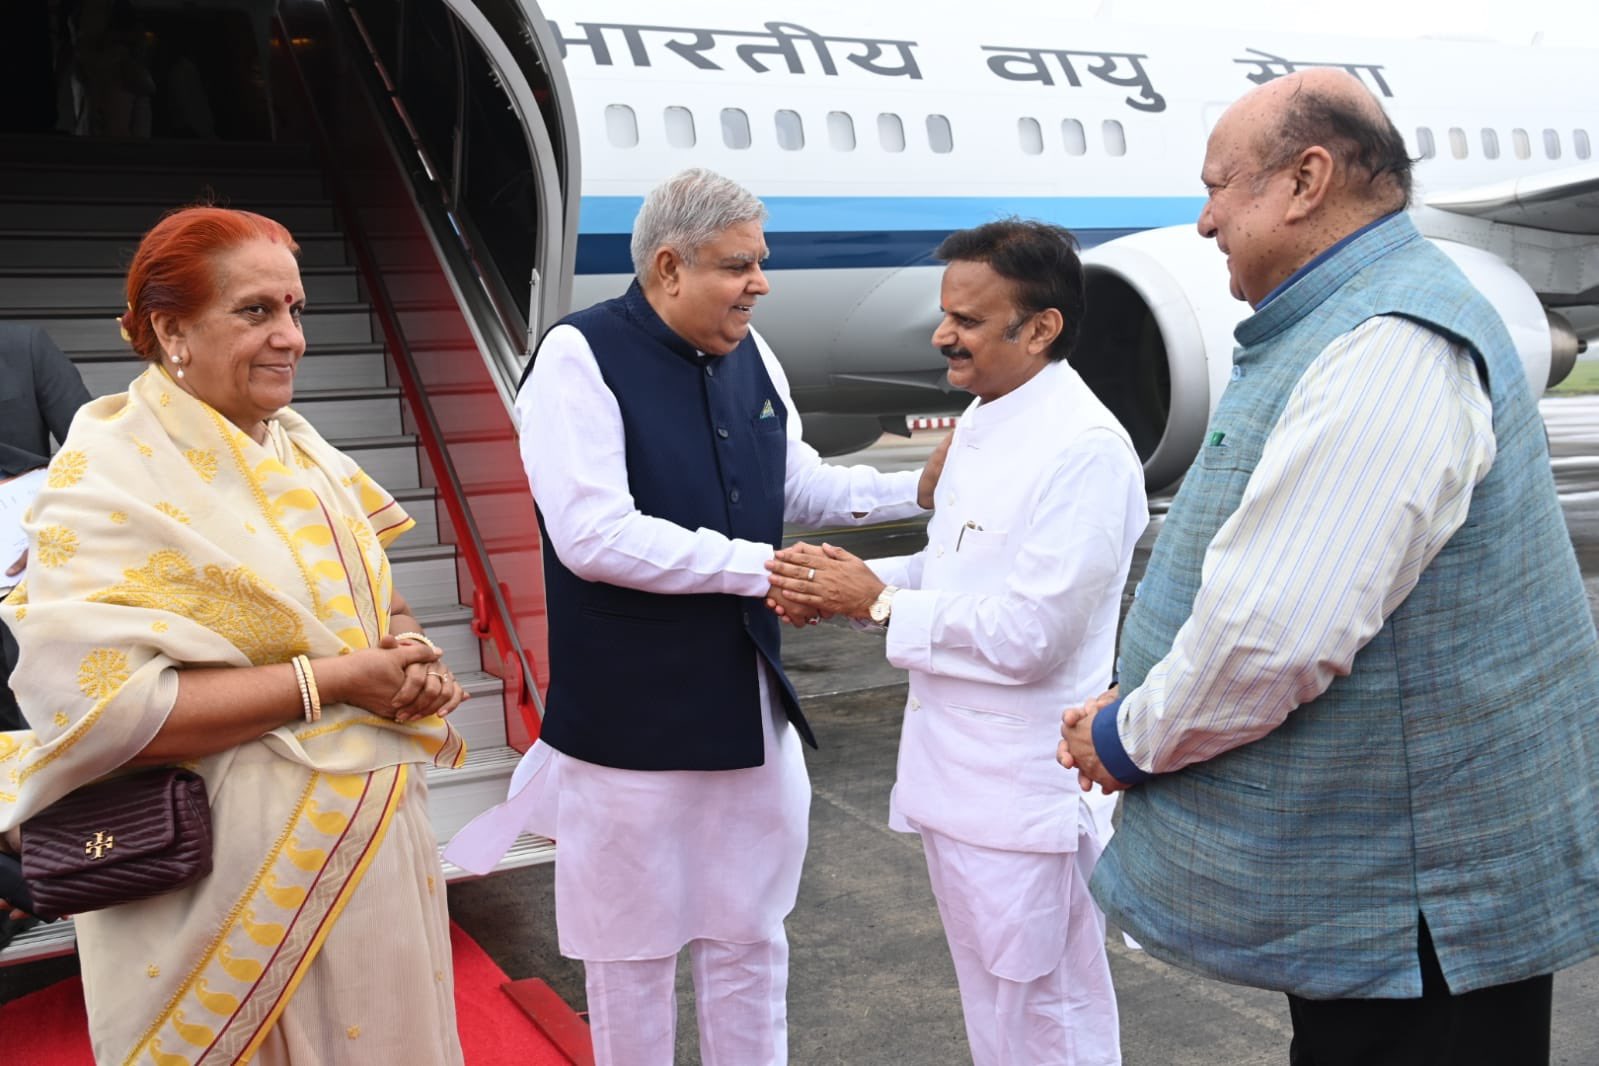 The Vice-President, Shri Jagdeep Dhankhar and Dr Sudesh Dhankhar being welcomed by Shri Rajendra Shukla, Minister, Government of Madhya Pradesh and other dignitaries on their arrival in Bhopal, Madhya Pradesh on September 15, 2023.